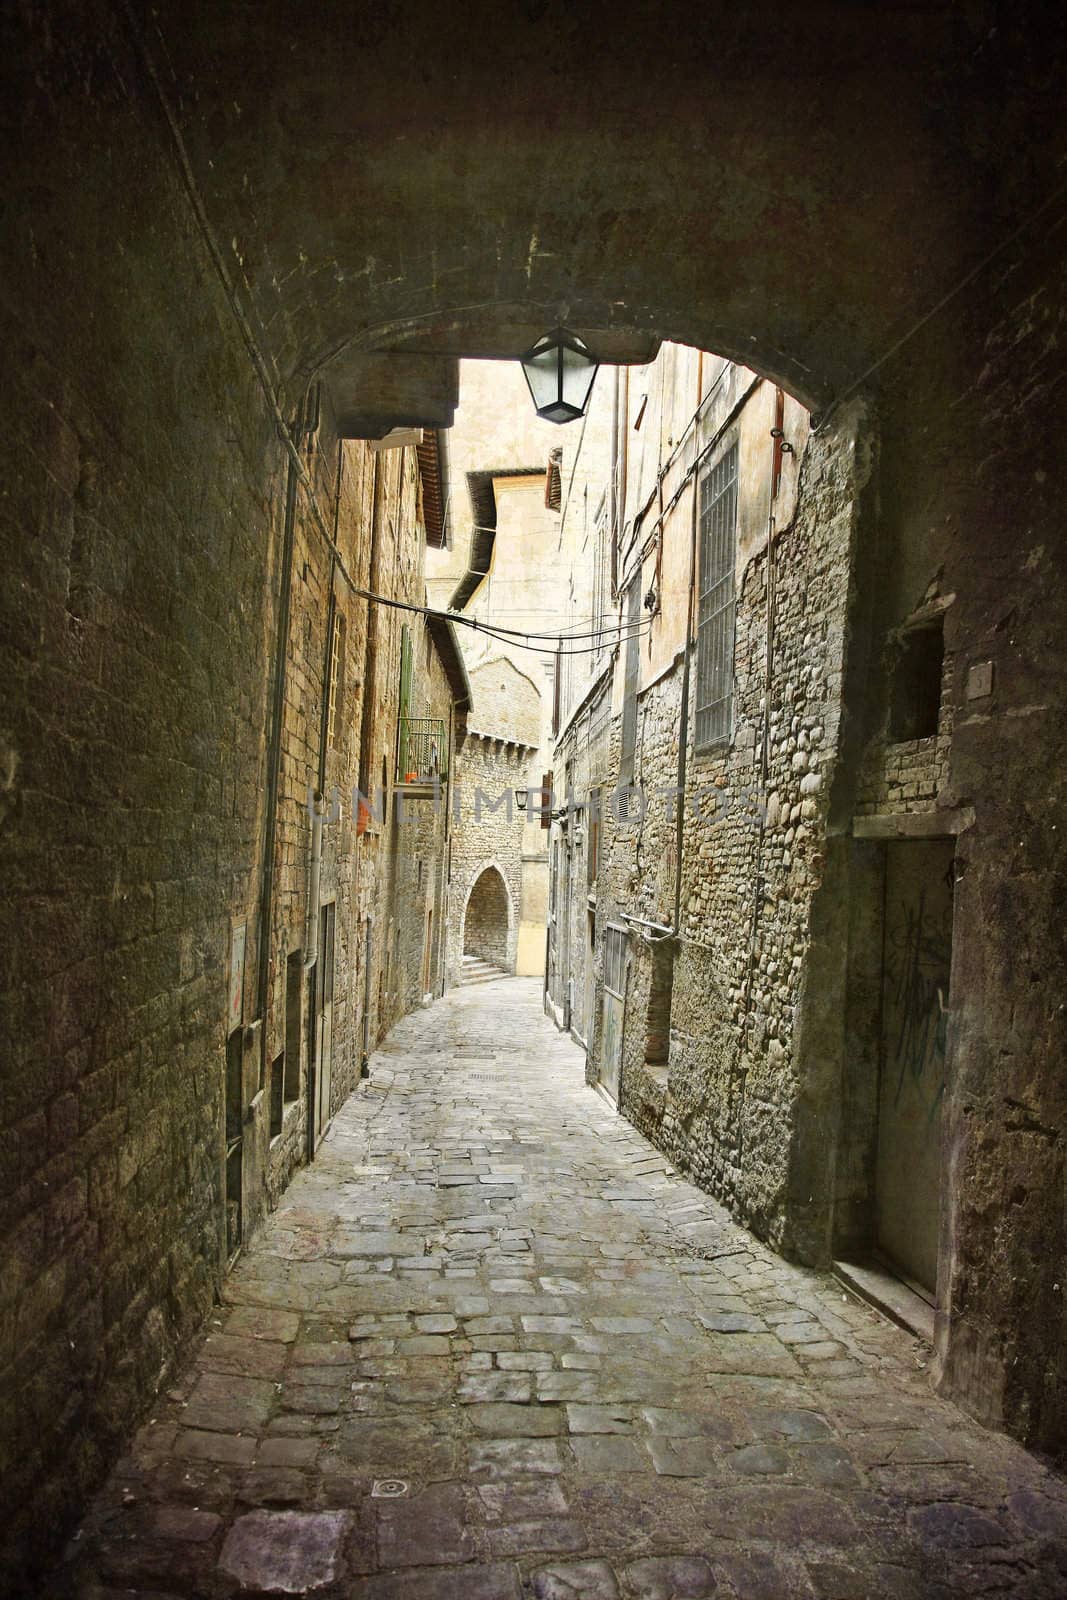 Artistic work of my own in retro style - Postcard from Italy. - Alley, Perugia, Umbria, Italy